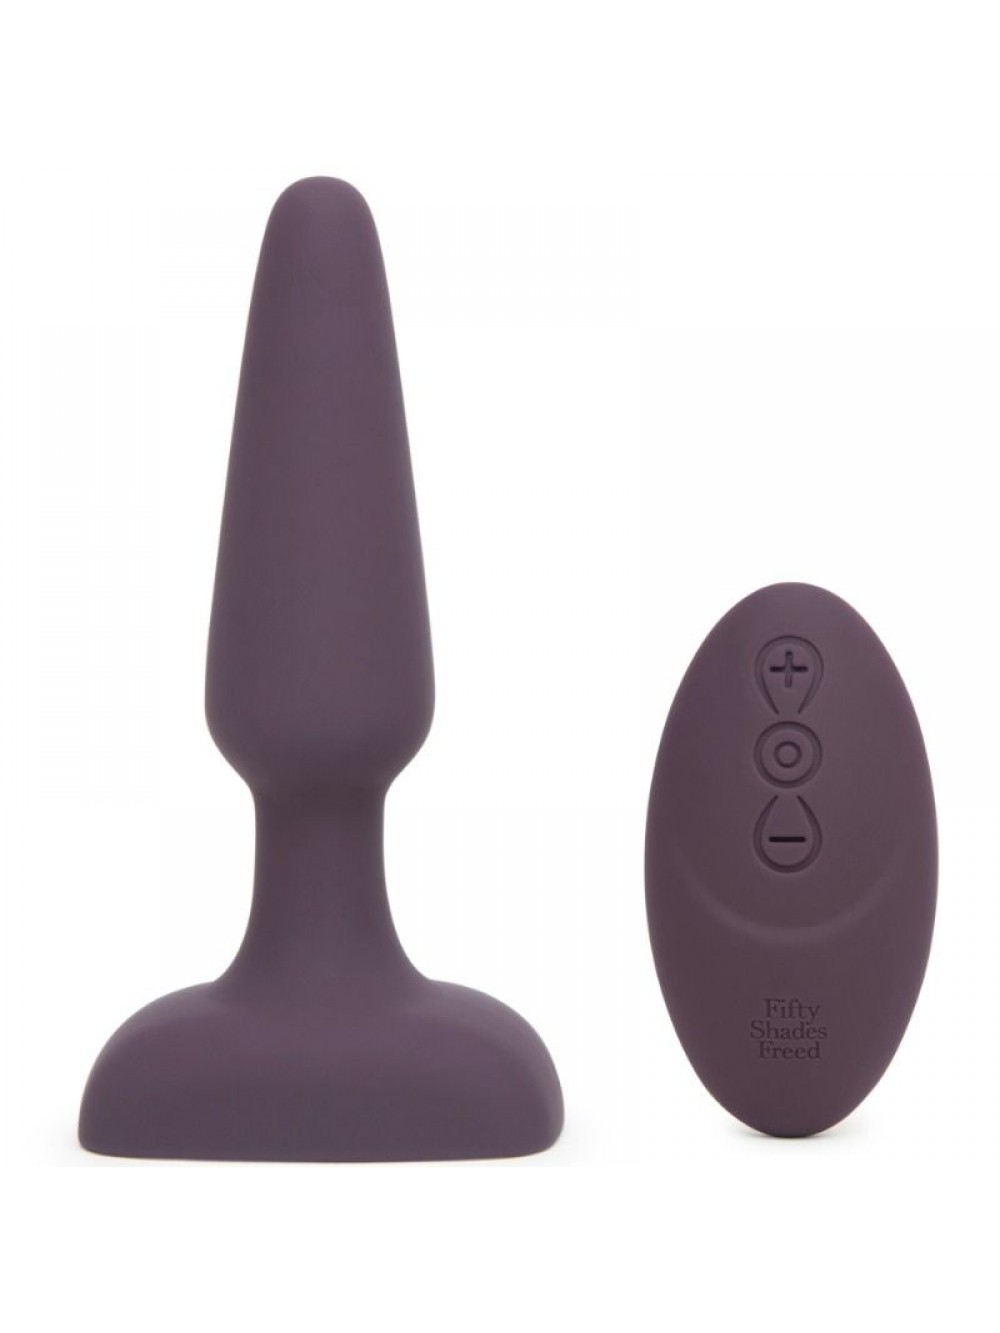 FIFTY SHADES FREED FEEL SO ALIVE RECHARGEABLE VIBRATING PLEASURE PLUG 5060493003457